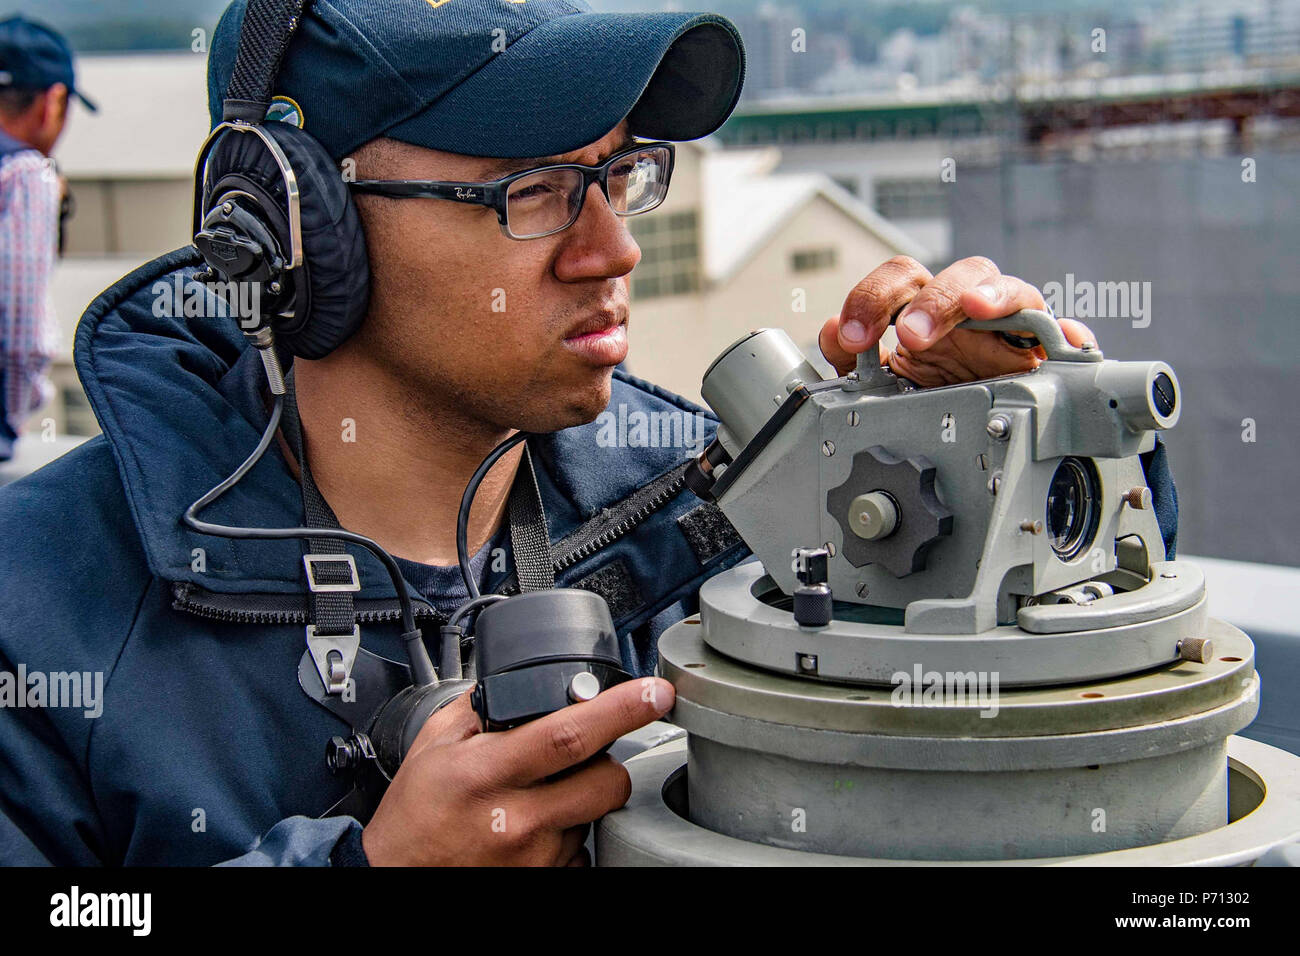 SASEBO, Japan (May 11, 2017) Quartermaster 3rd Class Brandon Martin takes bearing readings aboard the amphibious transport dock USS Green Bay (LPD 20) as the ship returns to its forward-deployed base of Sasebo, Japan during a Mid-Cycle Inspection (MCI). Green Bay, assigned to Commander, Amphibious Squadron 11, is conducting its MCI, which is conducted at the mid-year point prior to the Board of Inspection and Survey (INSURV) and is used to inspect and assess the material conditions of a ship. Stock Photo